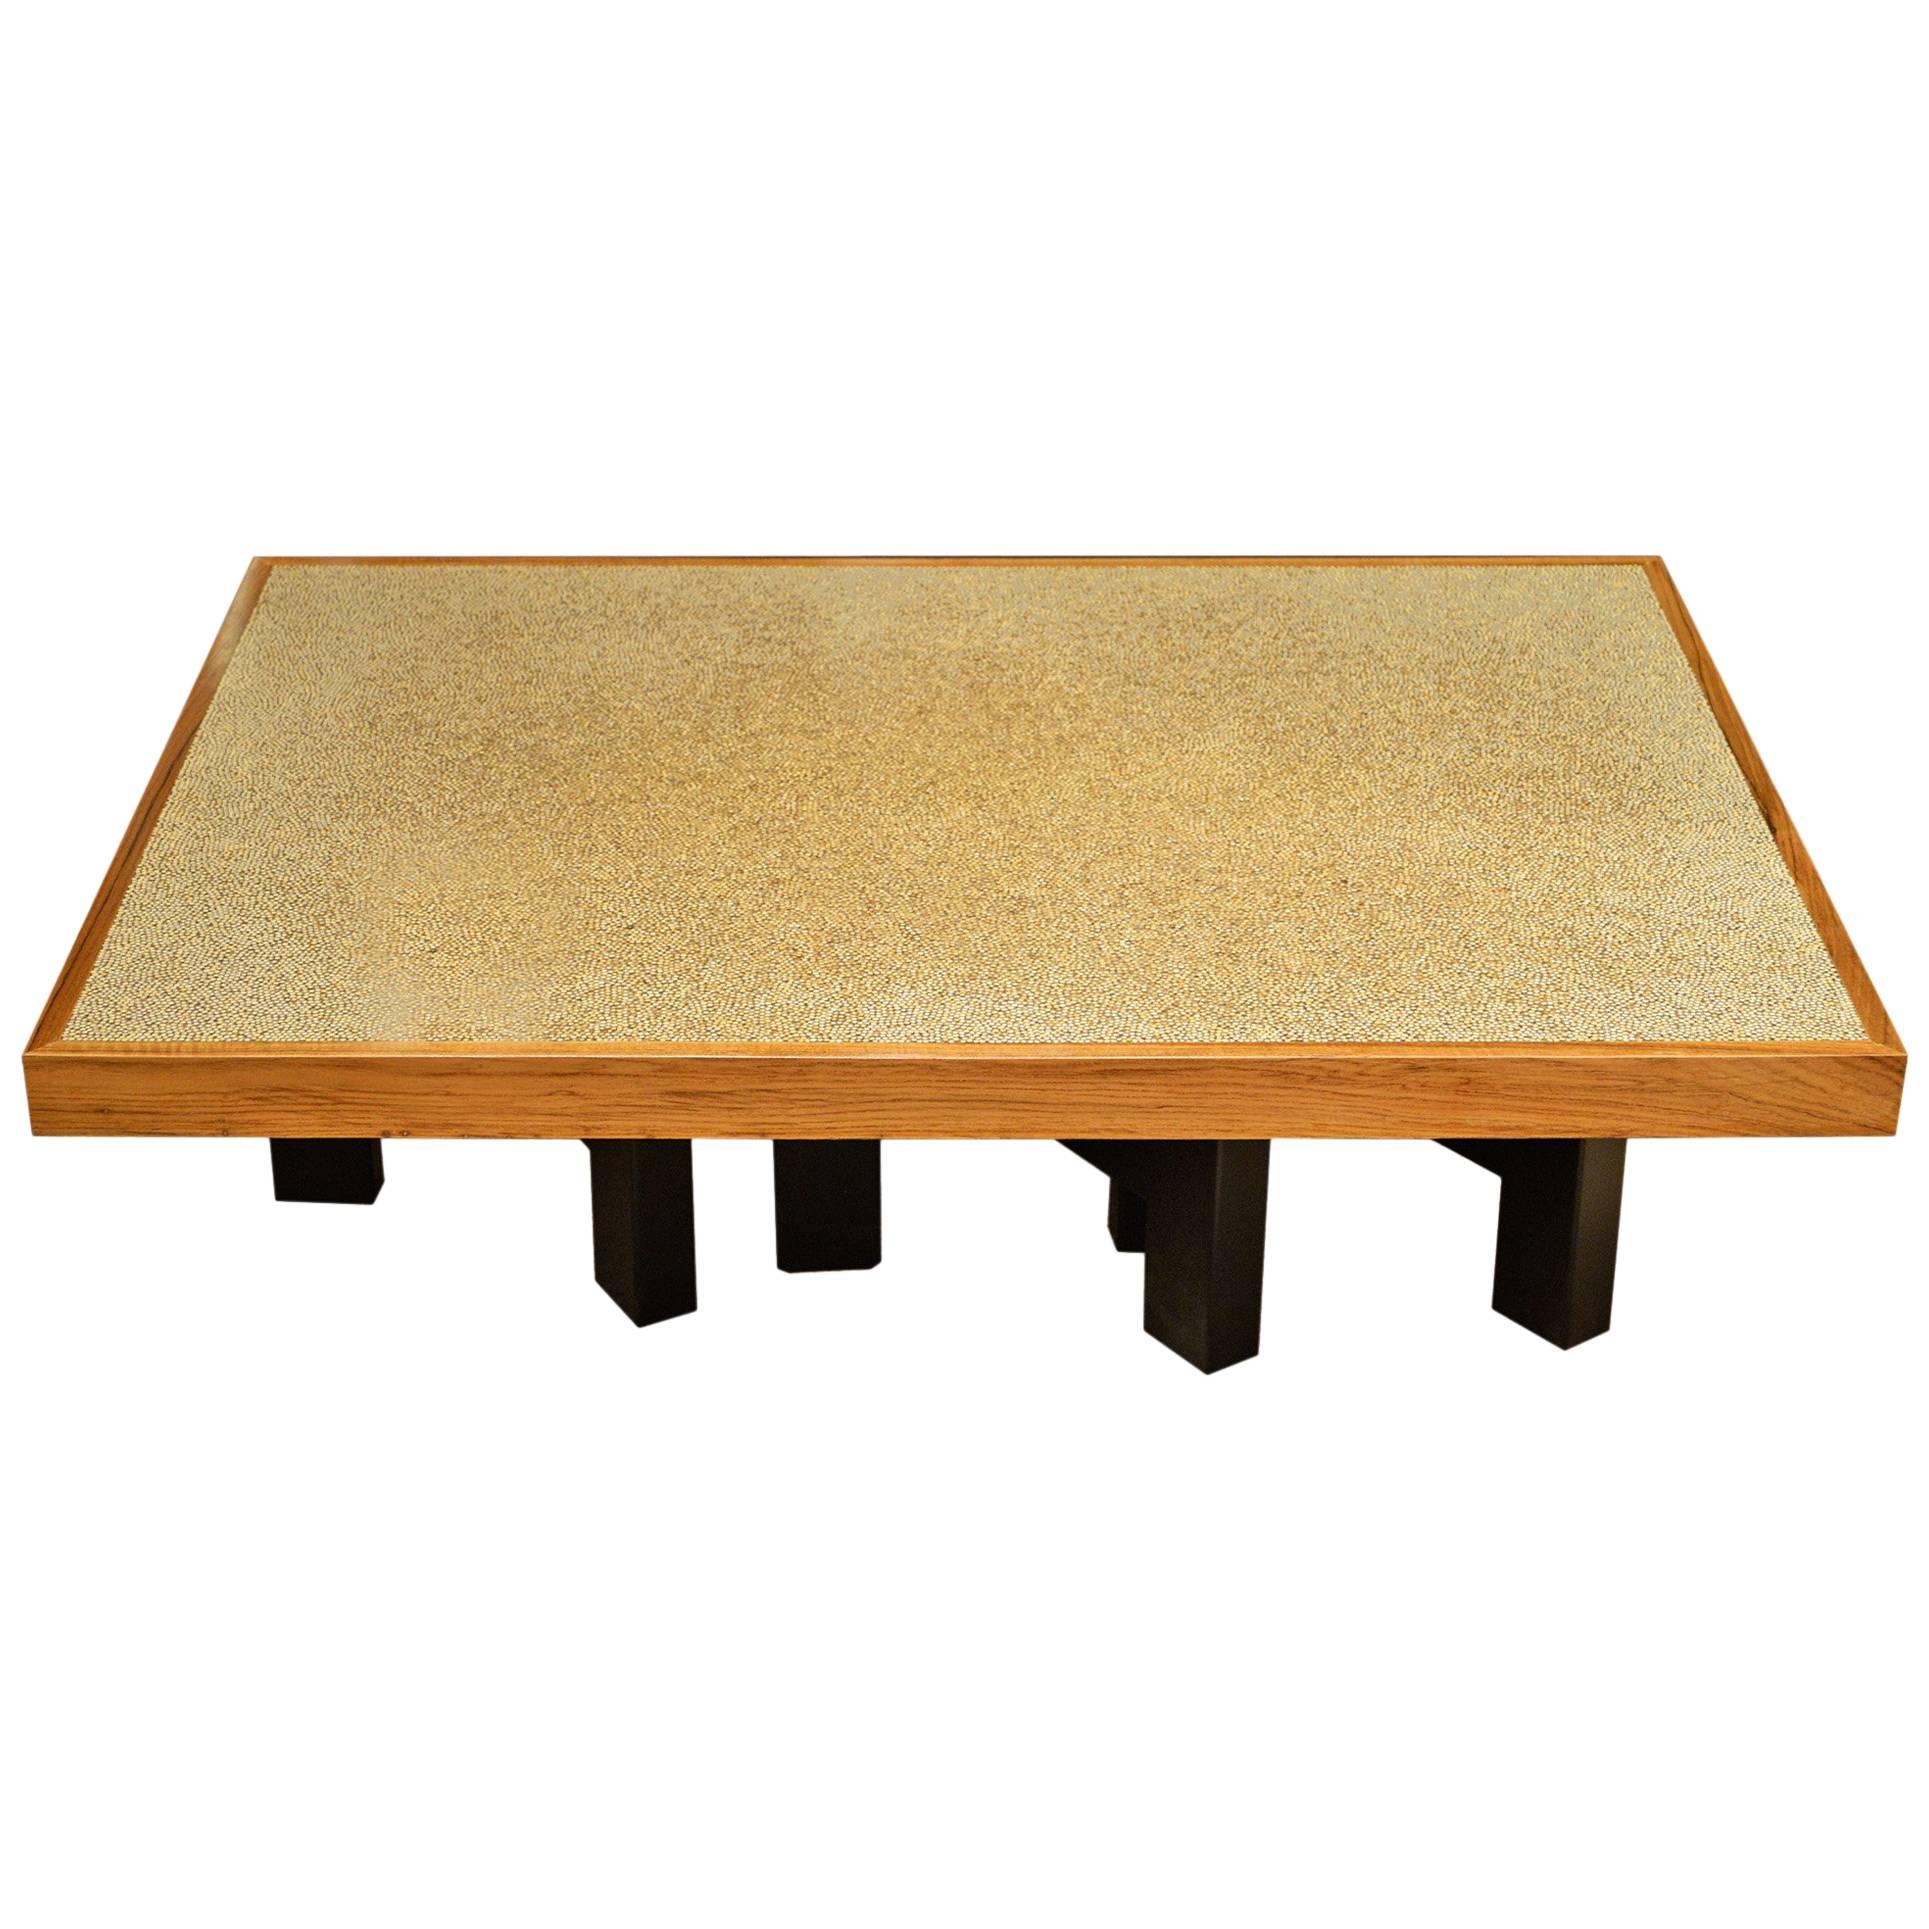 Ado Chale, Coffee Table with Peppercorn Inclusion into Resin, 1970s